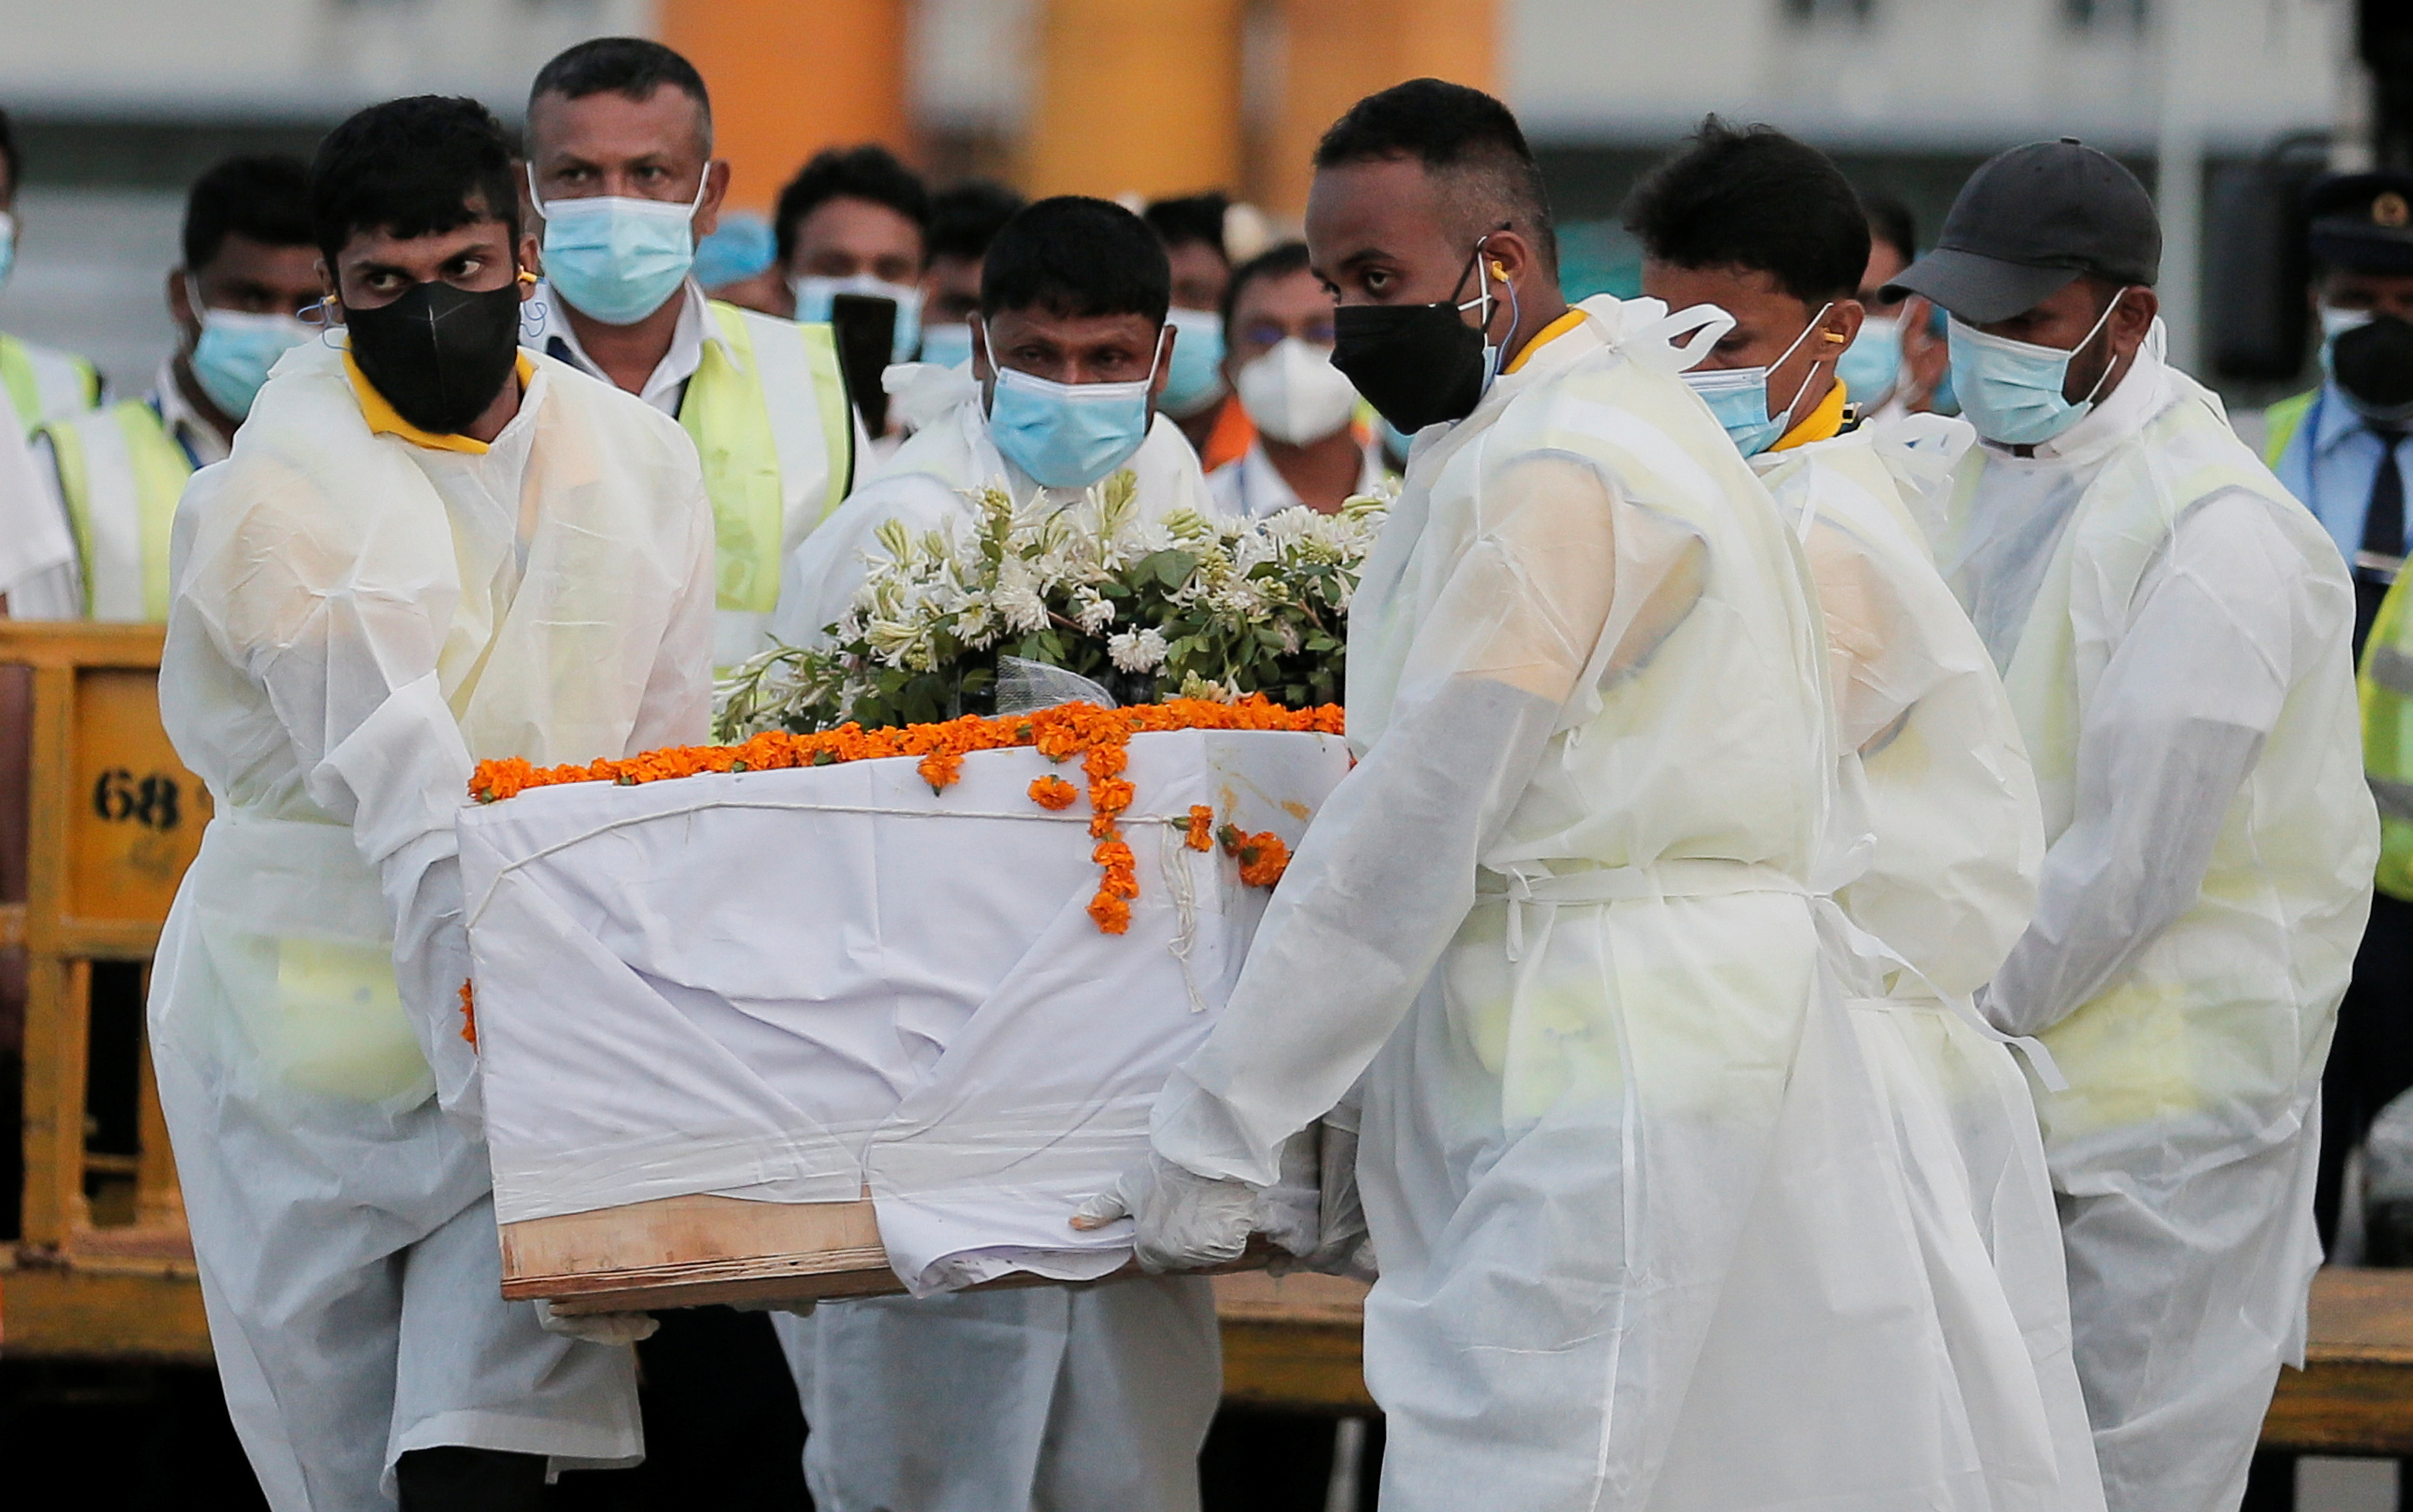 Airport staff carry the coffin with remains of Sri Lankan national Priyantha Kumara, who was beaten to death and burnt by the mob in Punjab province on last Friday, at Bandaranaike International Airport, in Katunayake, Sri Lanka December 6, 2021. REUTERS/Dinuka Liyanawatte